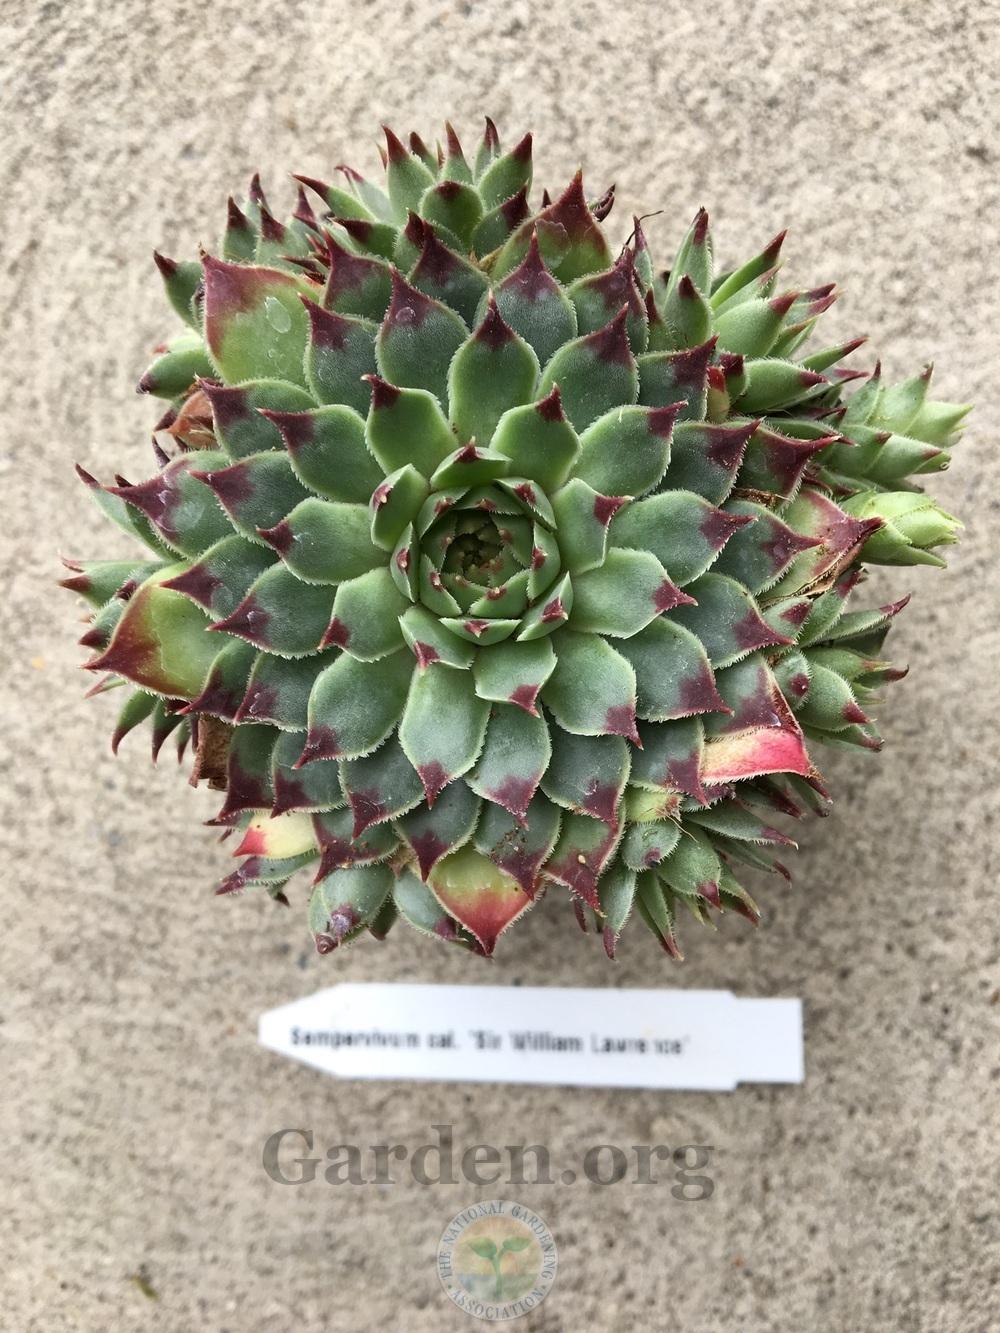 Photo of Hen and Chicks (Sempervivum calcareum 'Sir William Lawrence') uploaded by BlueOddish